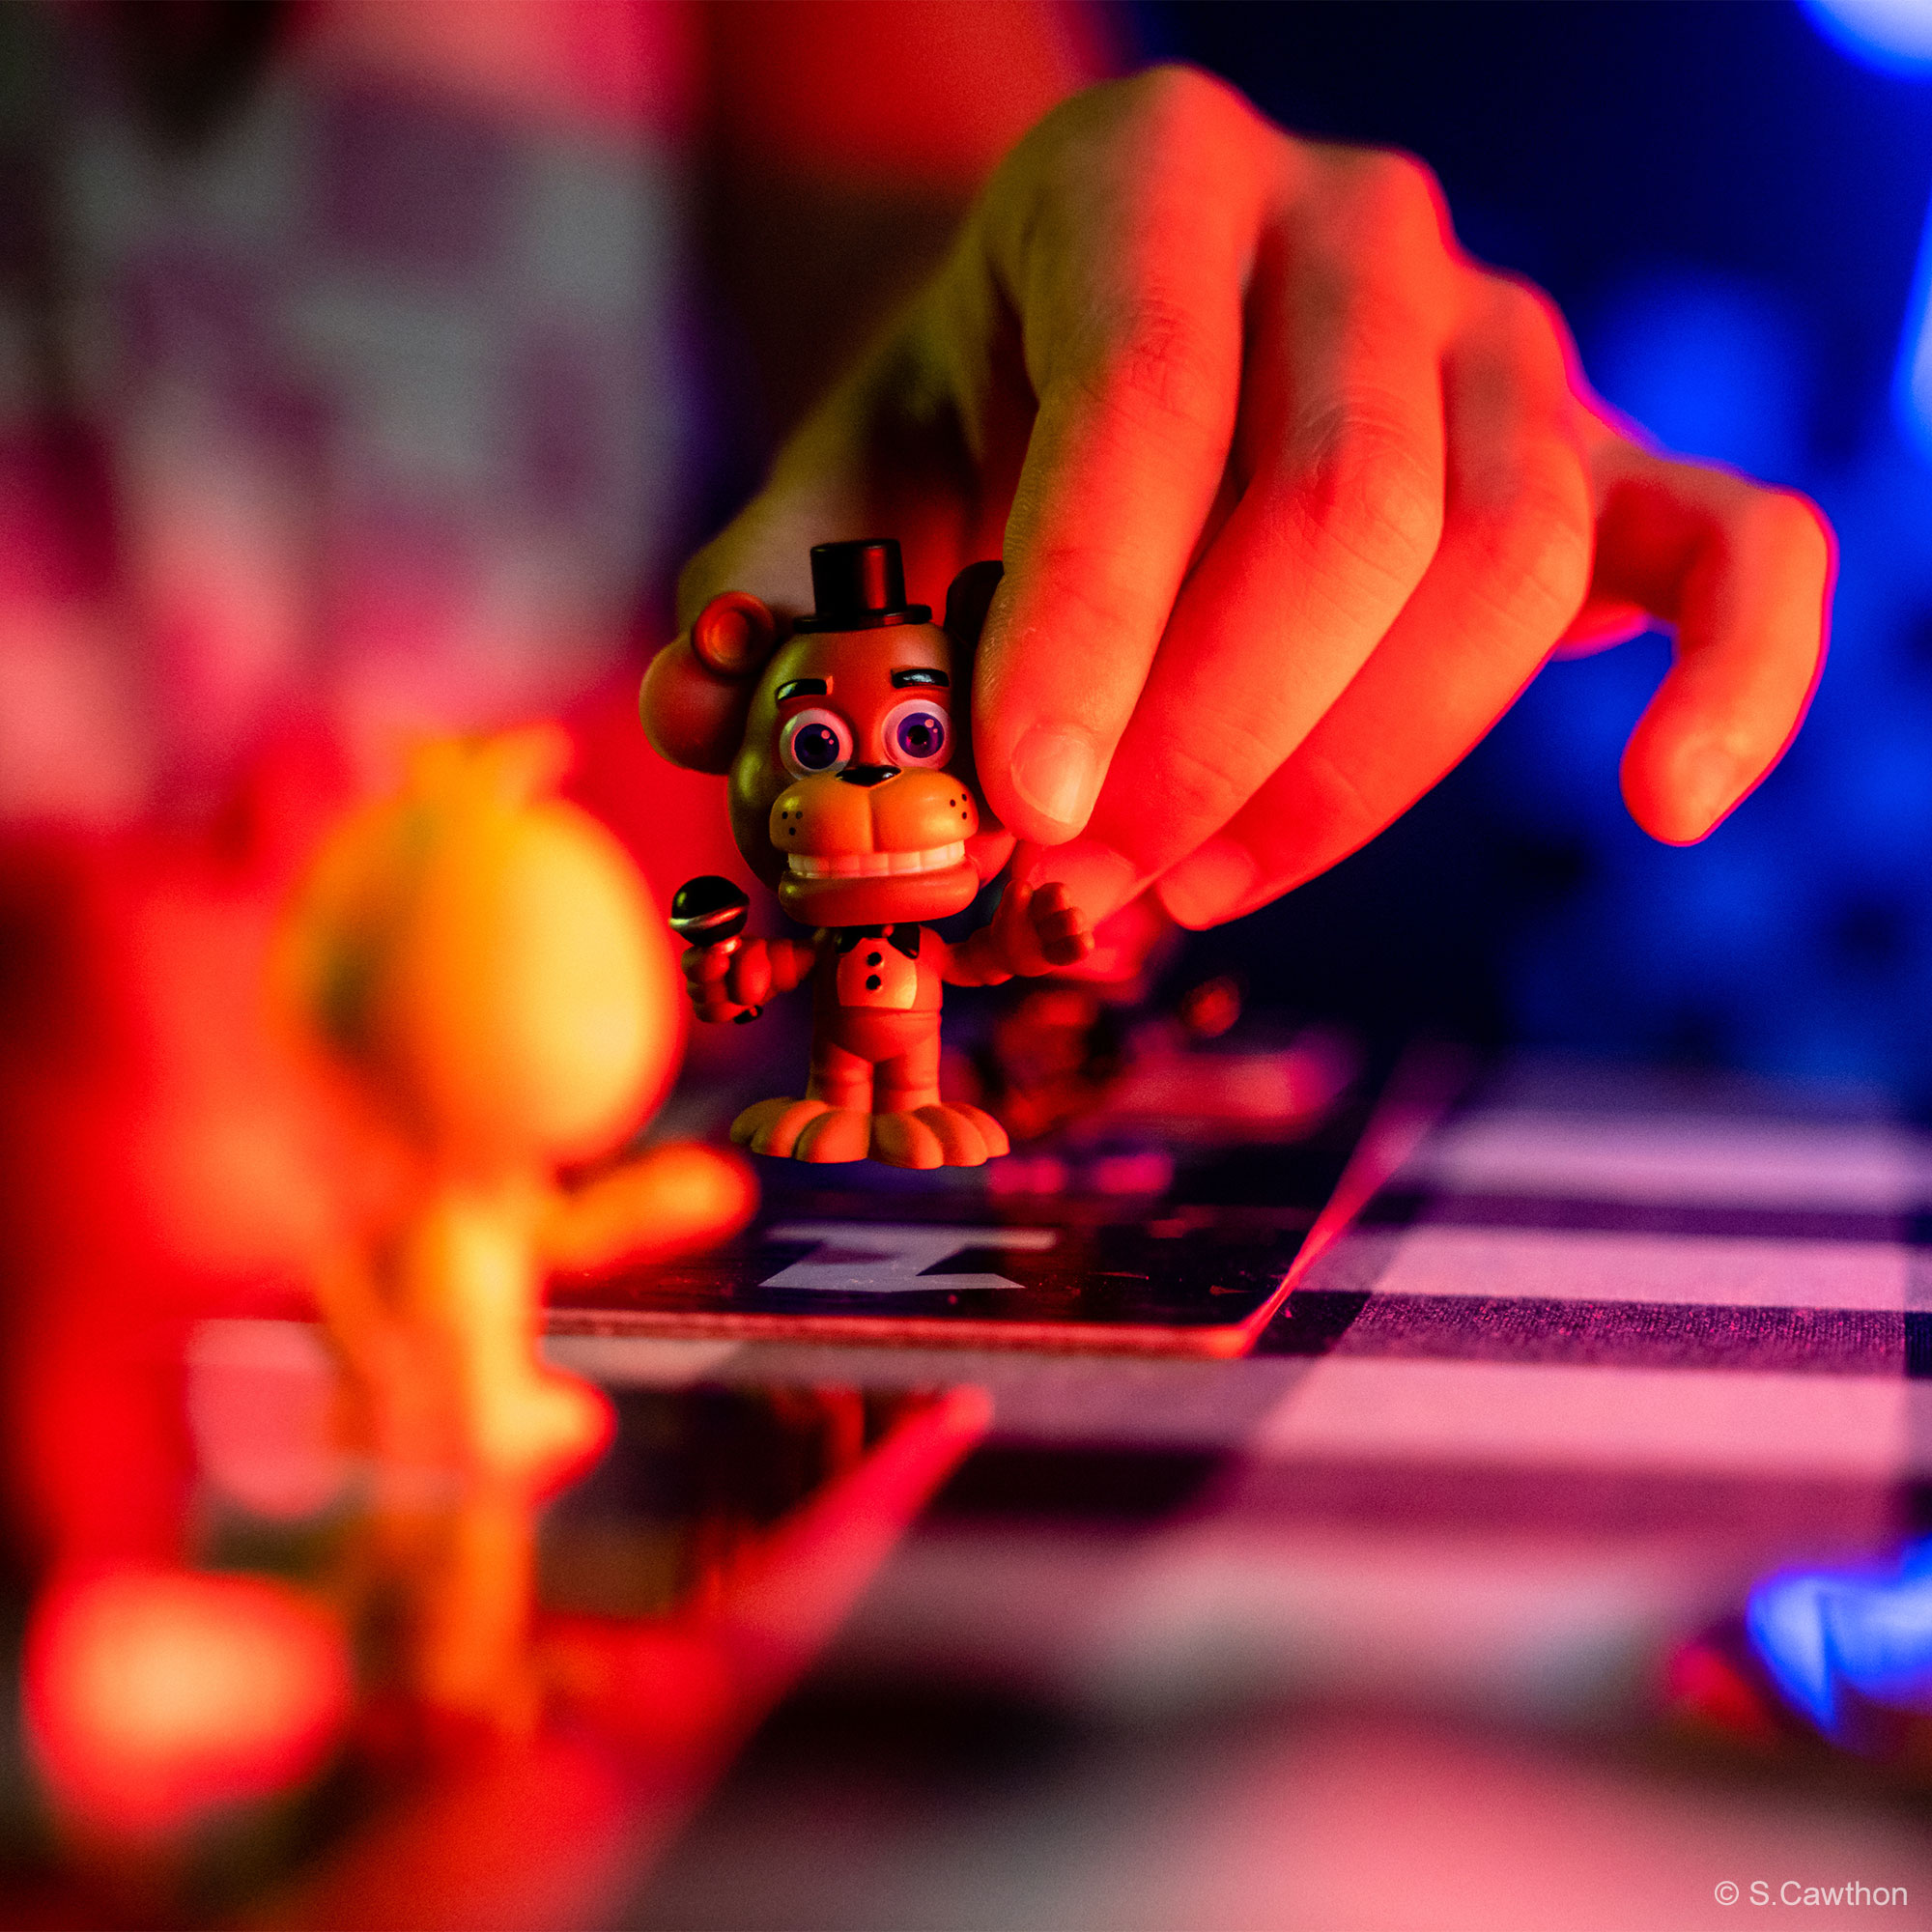 Five Nights at Freddy's: FightLine Collectible Game Revealed by Funko - IGN